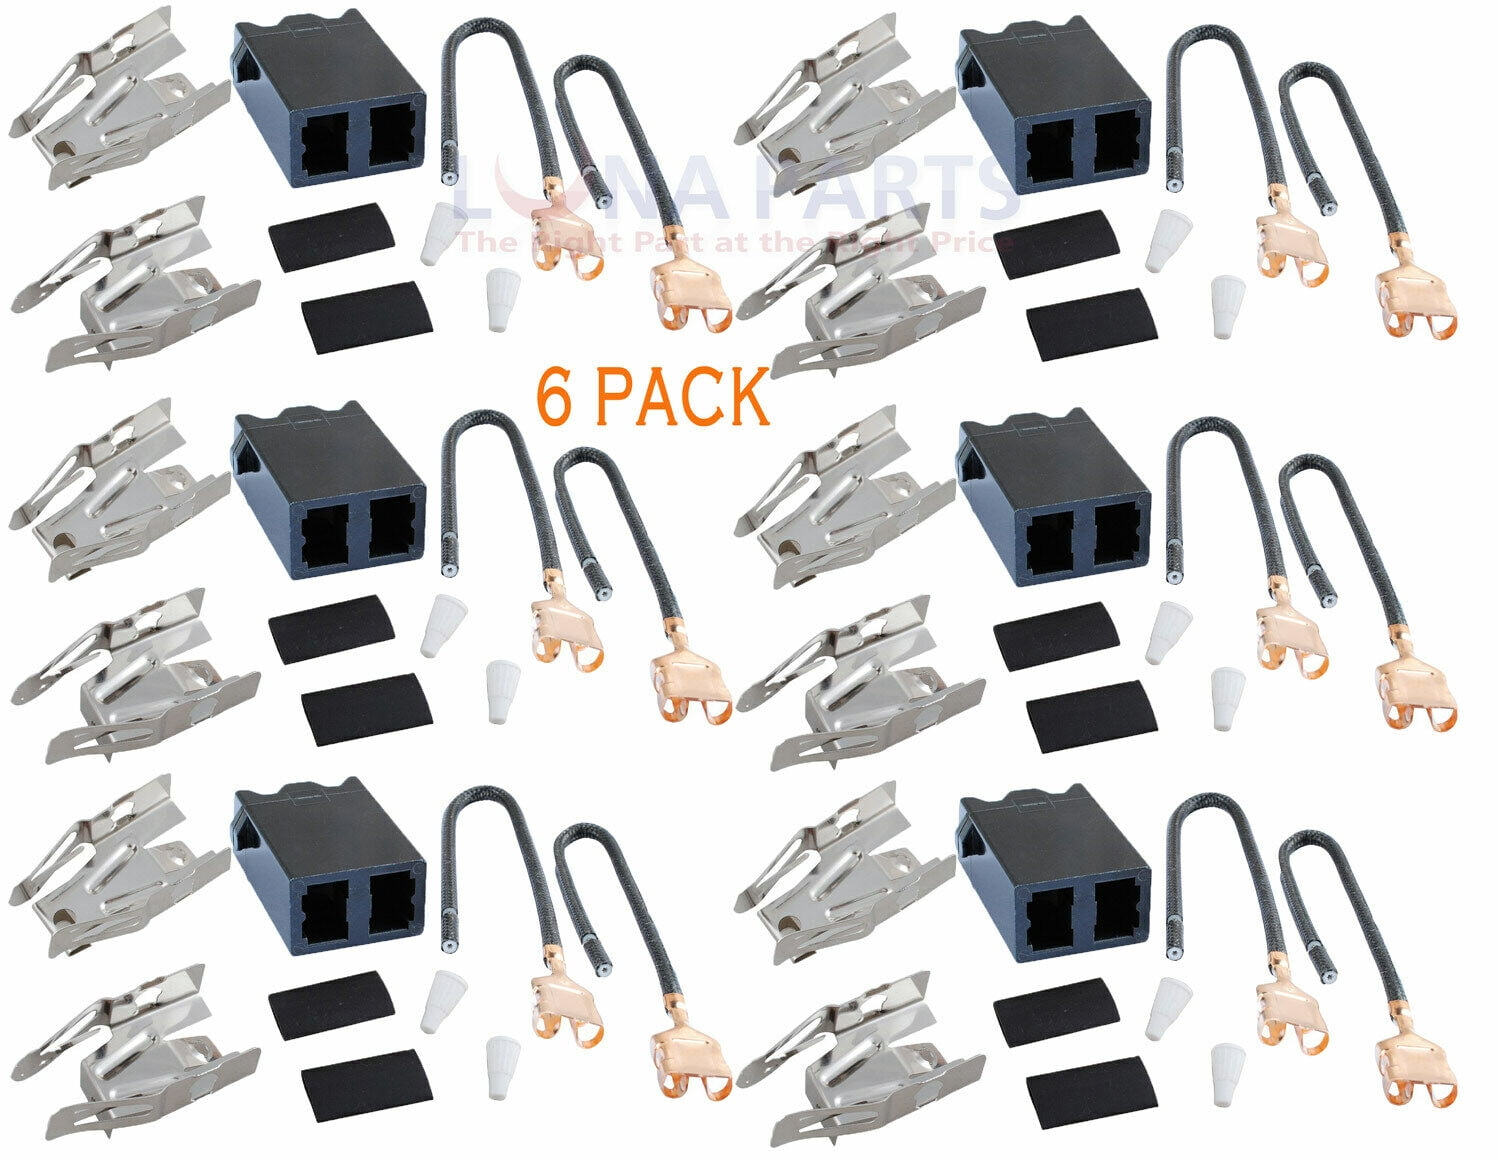 4-pack Stove Burner Terminal Receptacle Kit RR117 Replacement for WB17X210 